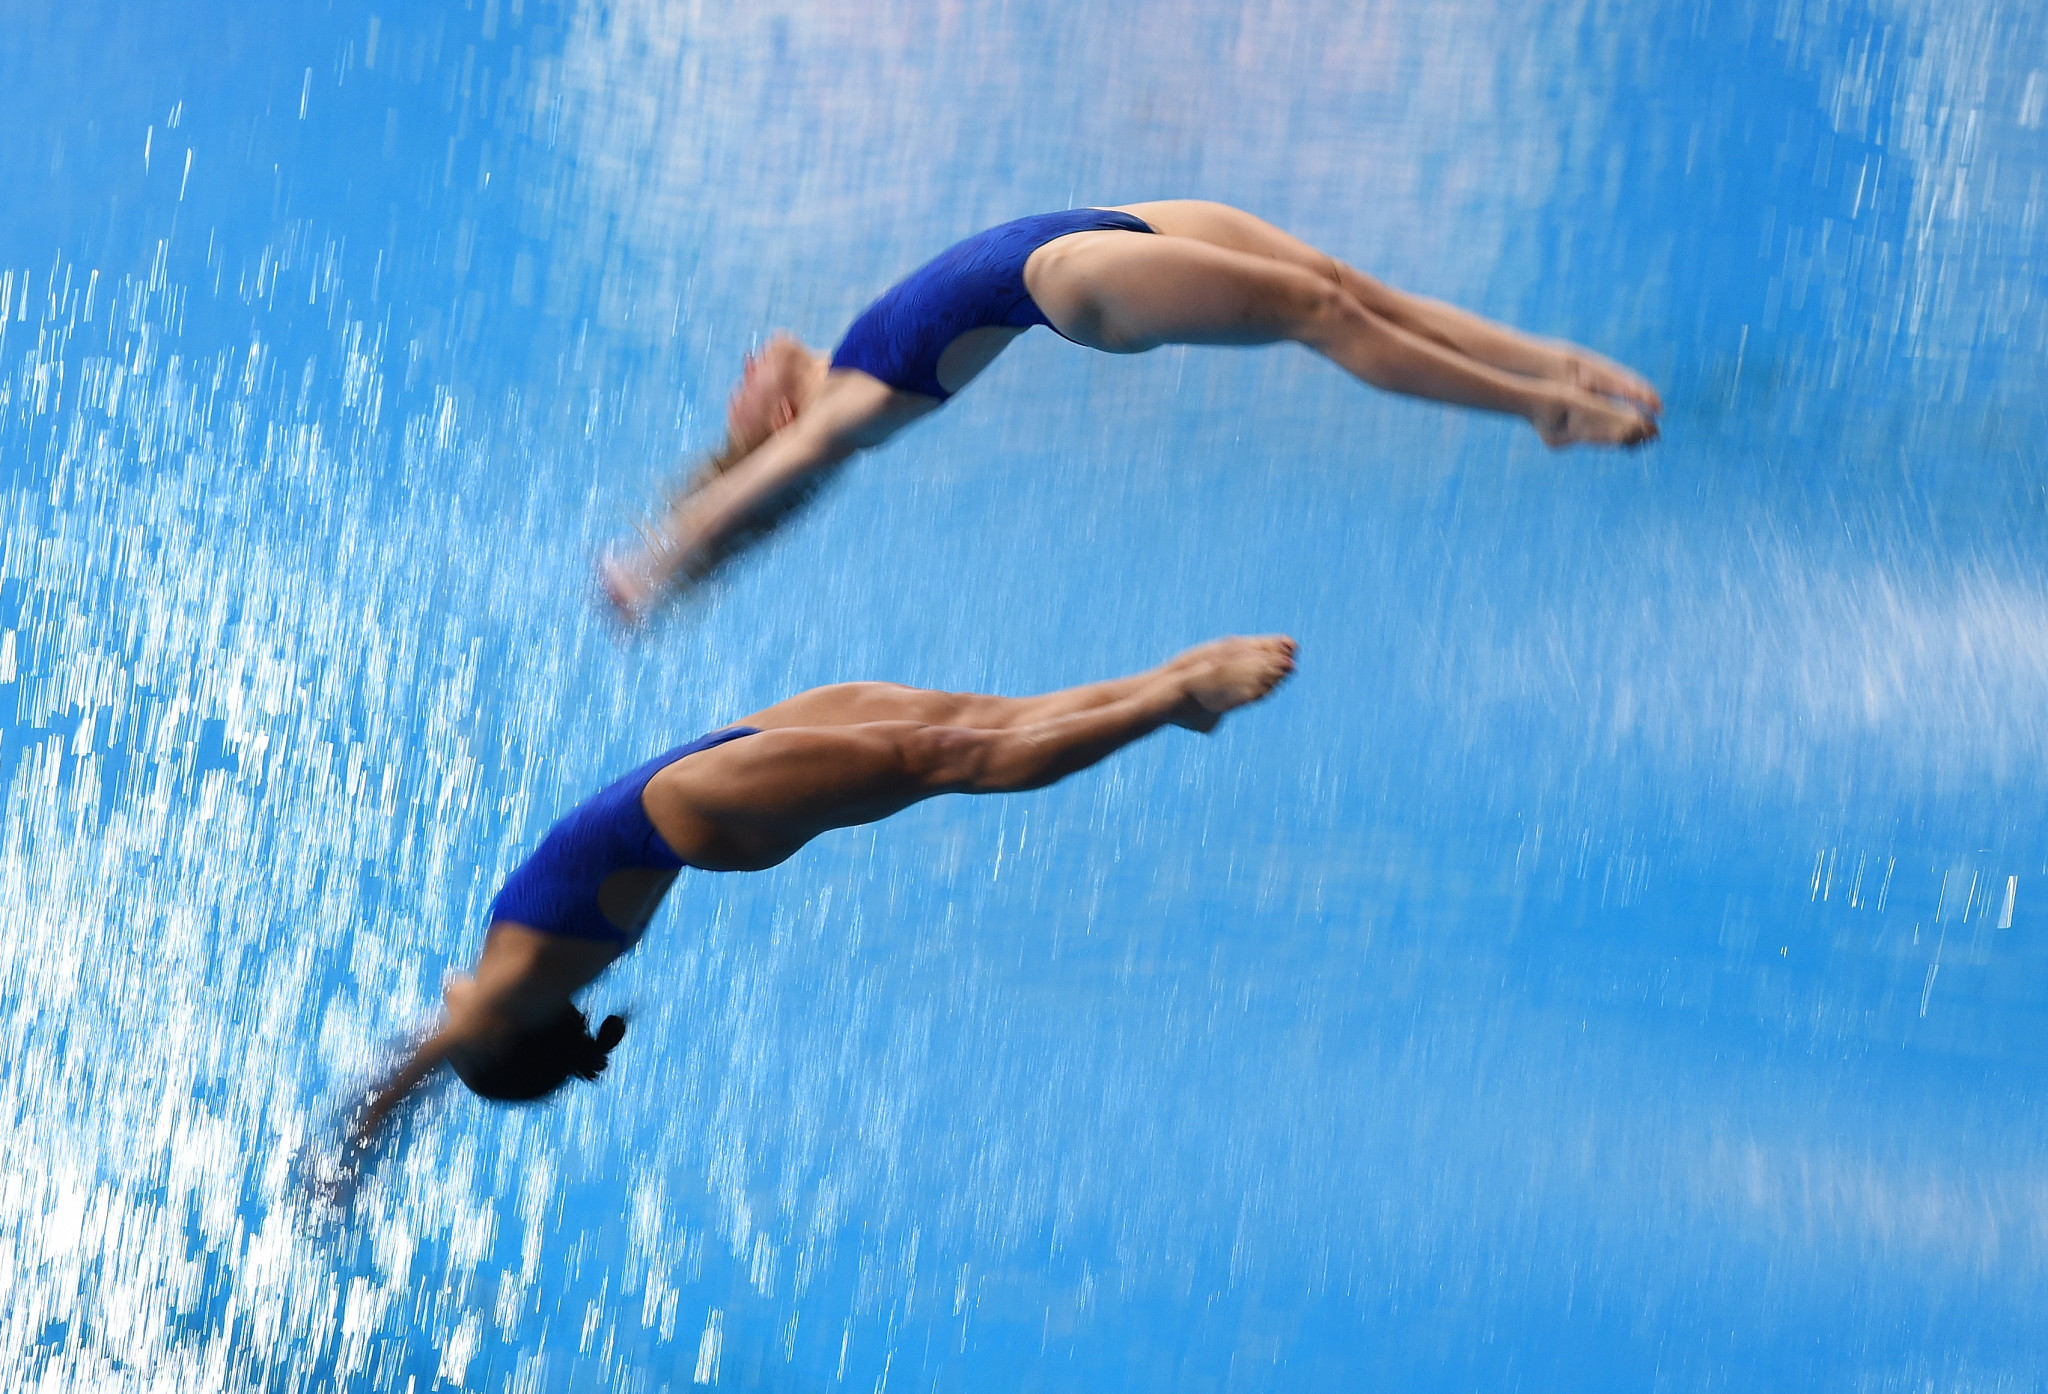 American women bag double gold on final day of FINA Diving Grand Prix